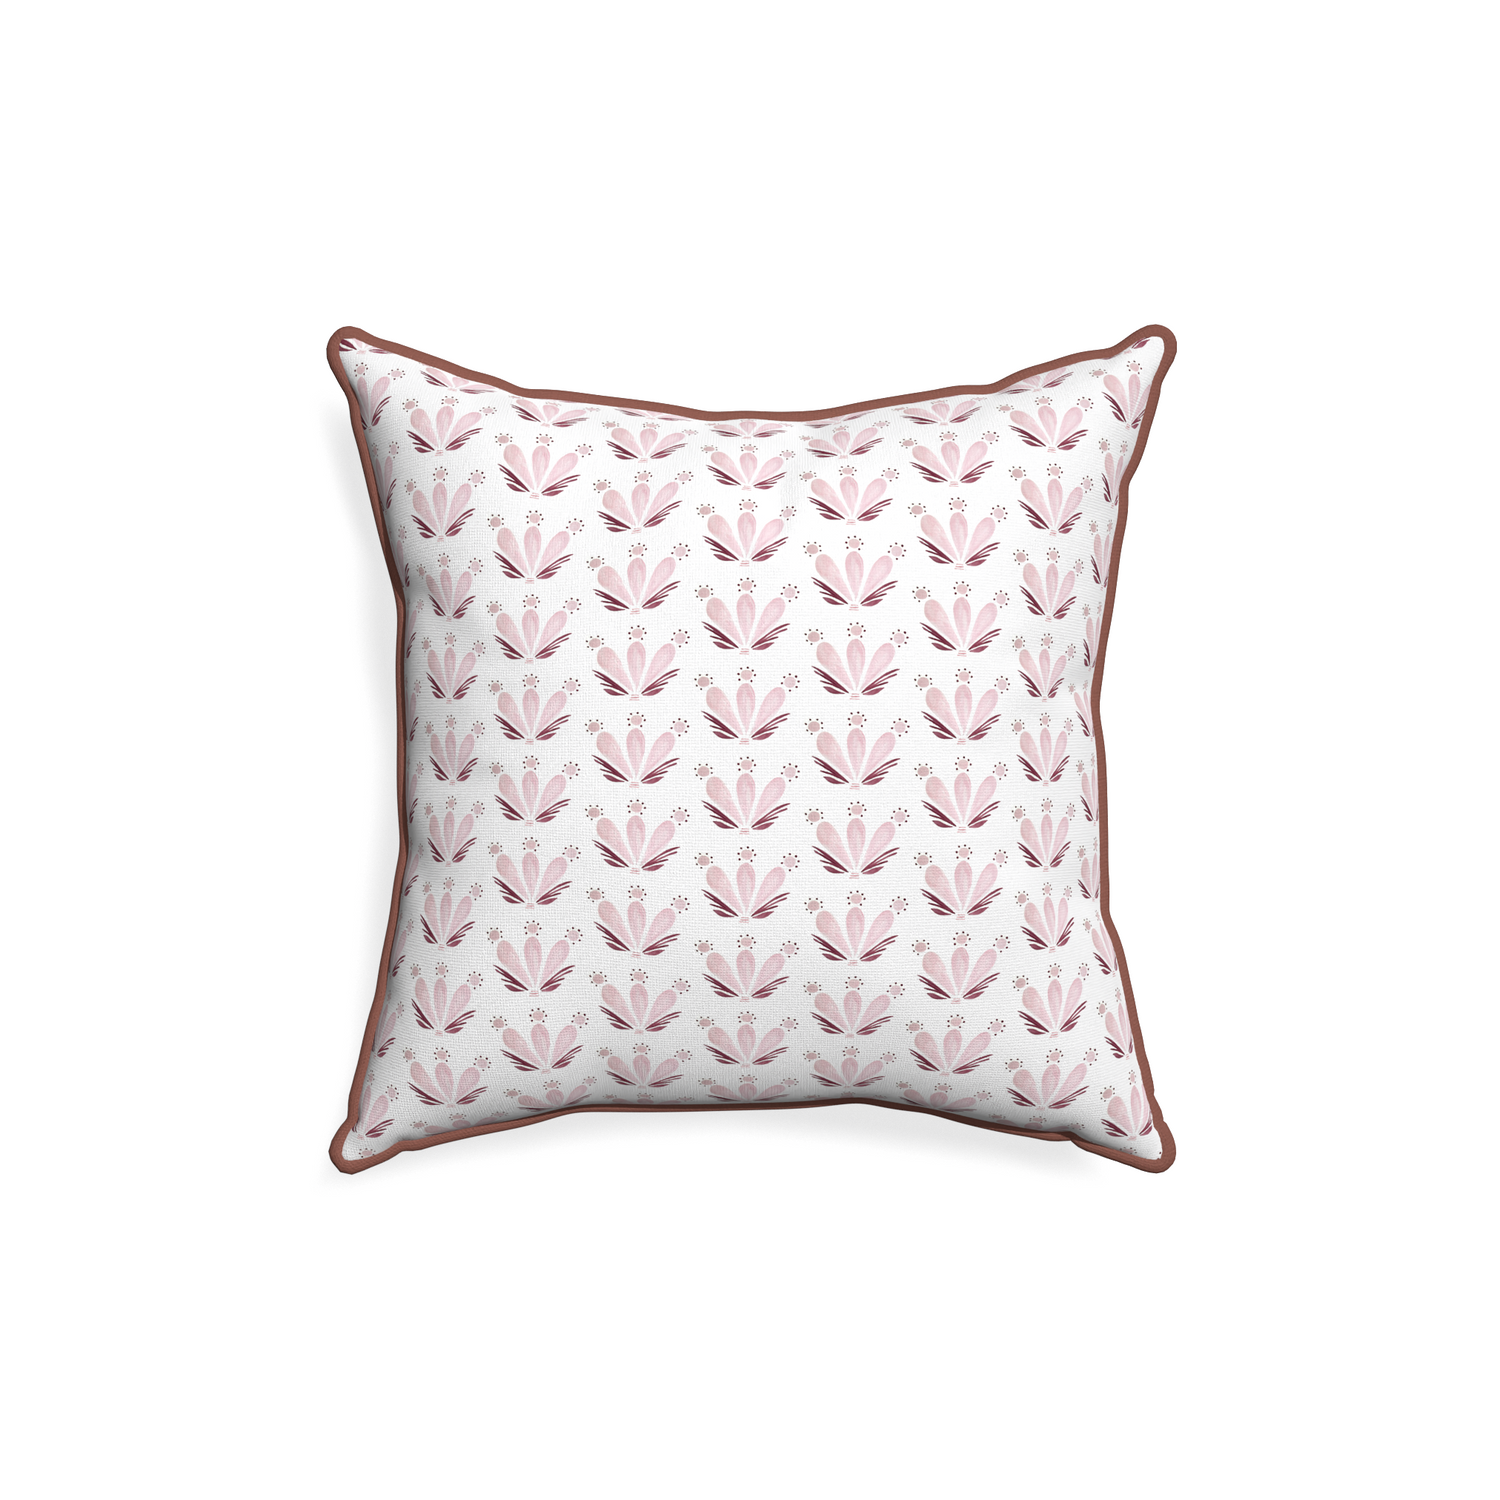 18-square serena pink custom pillow with w piping on white background